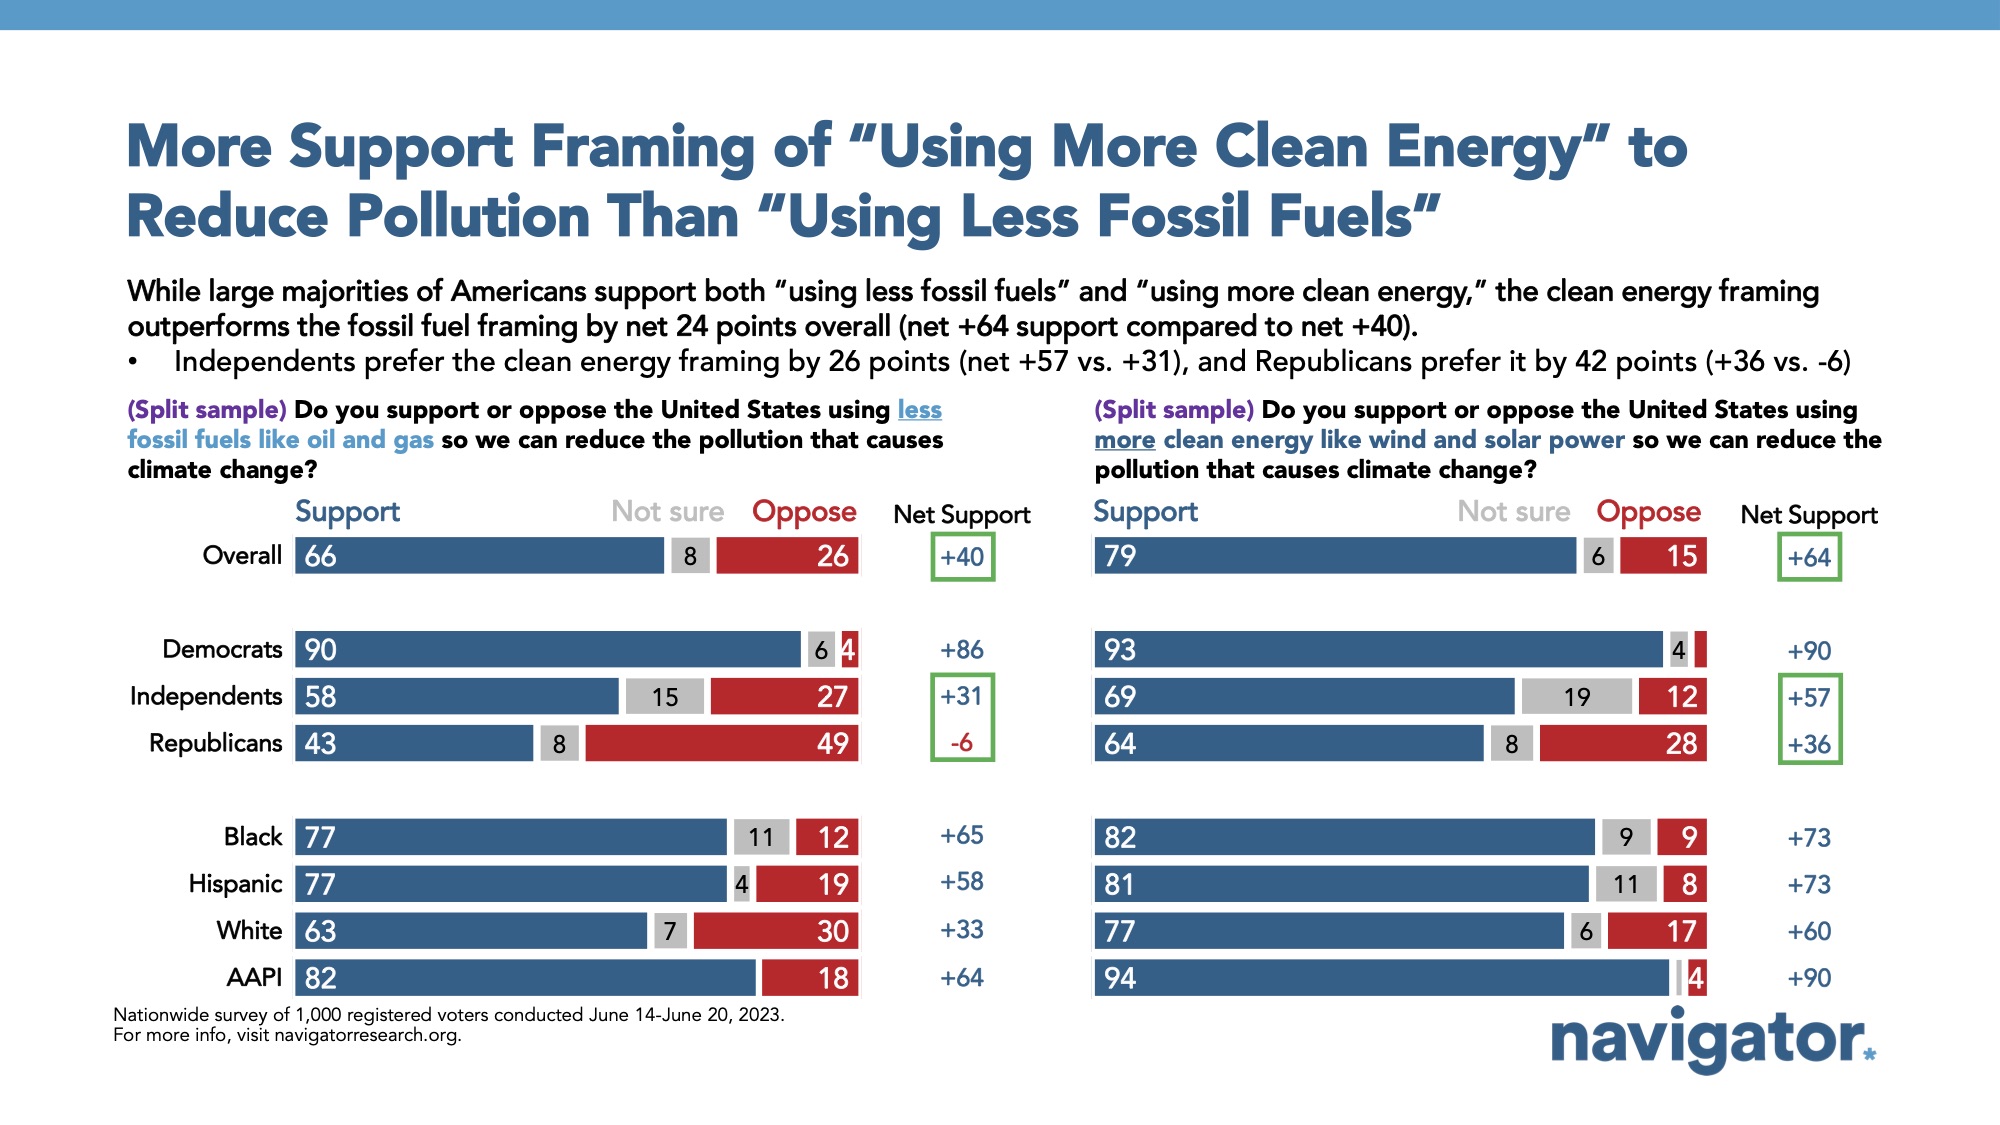 Survey results to the following prompts (split sample): (Split sample) Do you support or oppose the United States using less fossil fuels like oil and gas so we can reduce the pollution that causes climate change? (Split sample) Do you support or oppose the United States using more clean energy like wind and solar power so we can reduce the pollution that causes climate change?